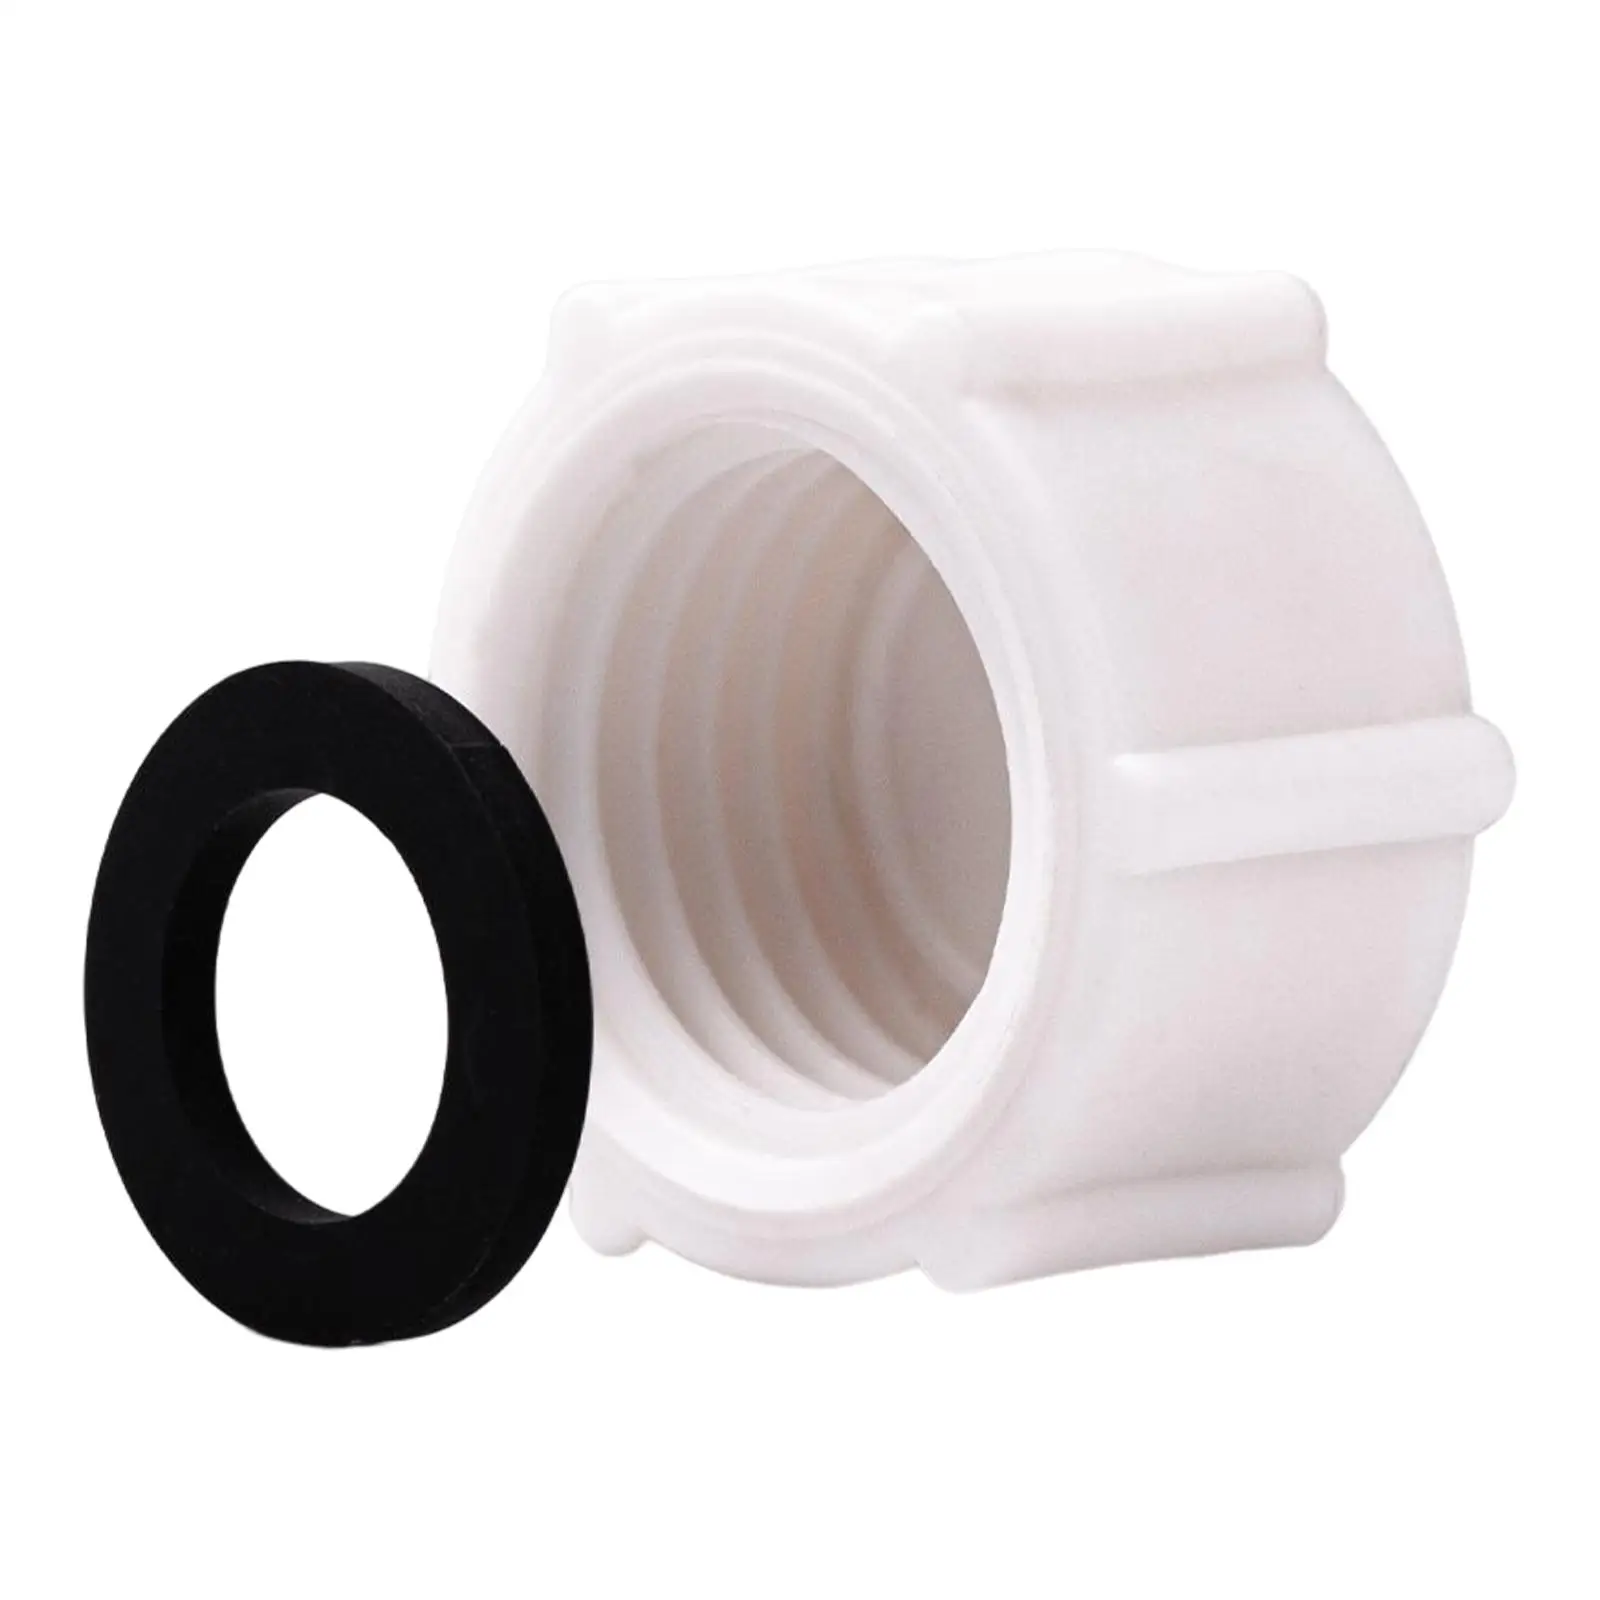 Pool Drain Valve Cap & O Rings for Sand Filter Pump for Above Ground Pool Replacement Parts , Drain Plug Cap